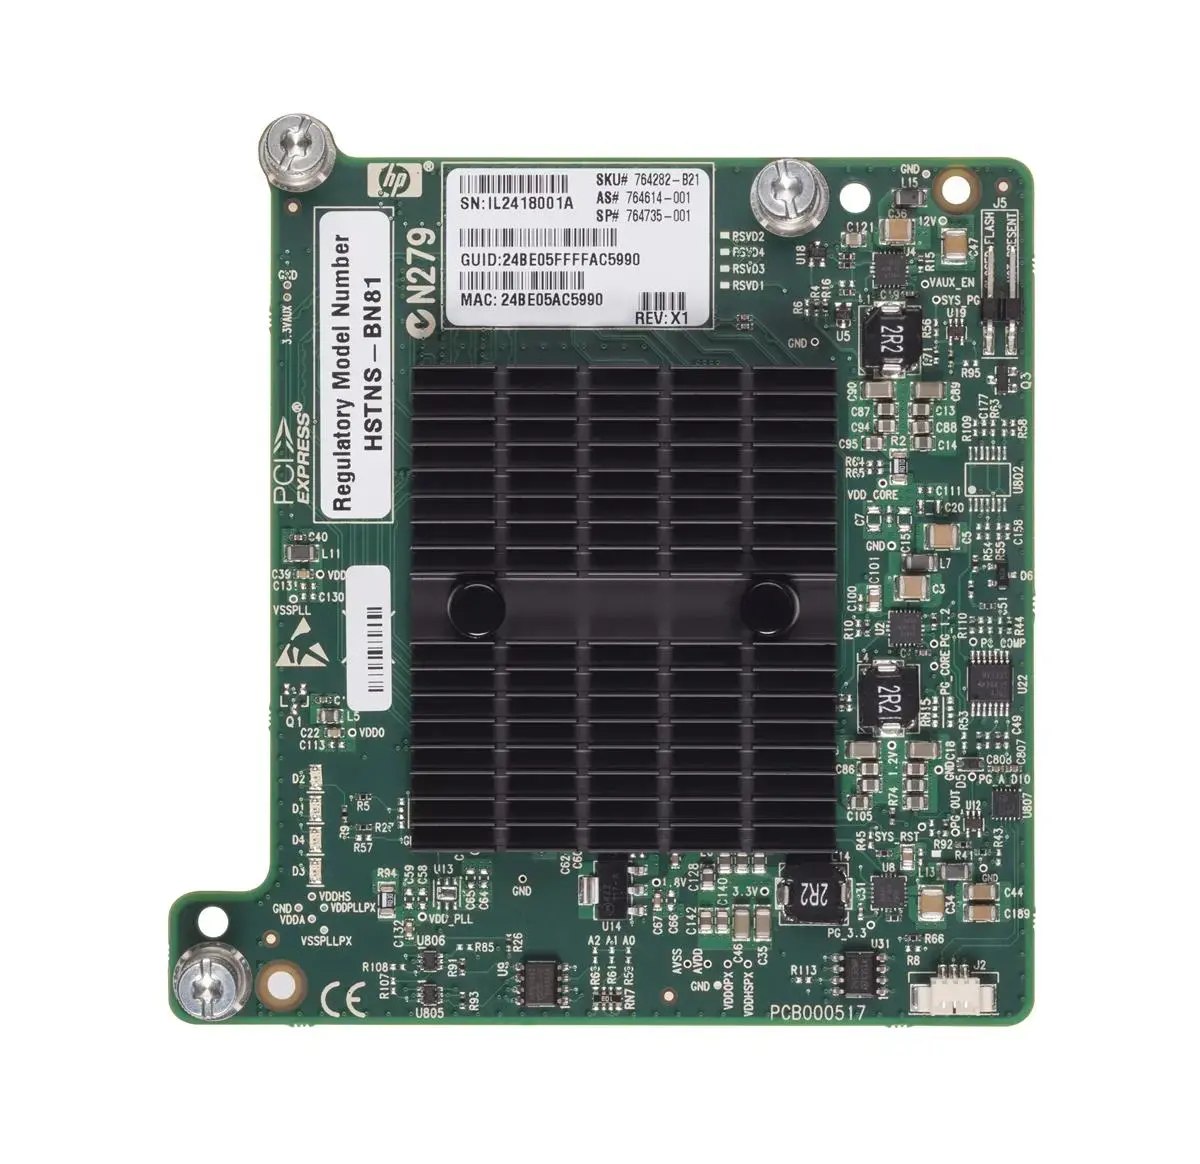 HSTNS-BN81 HP InfiniBAnd 544+M 10GB/s Dual Port PCI-Exp...